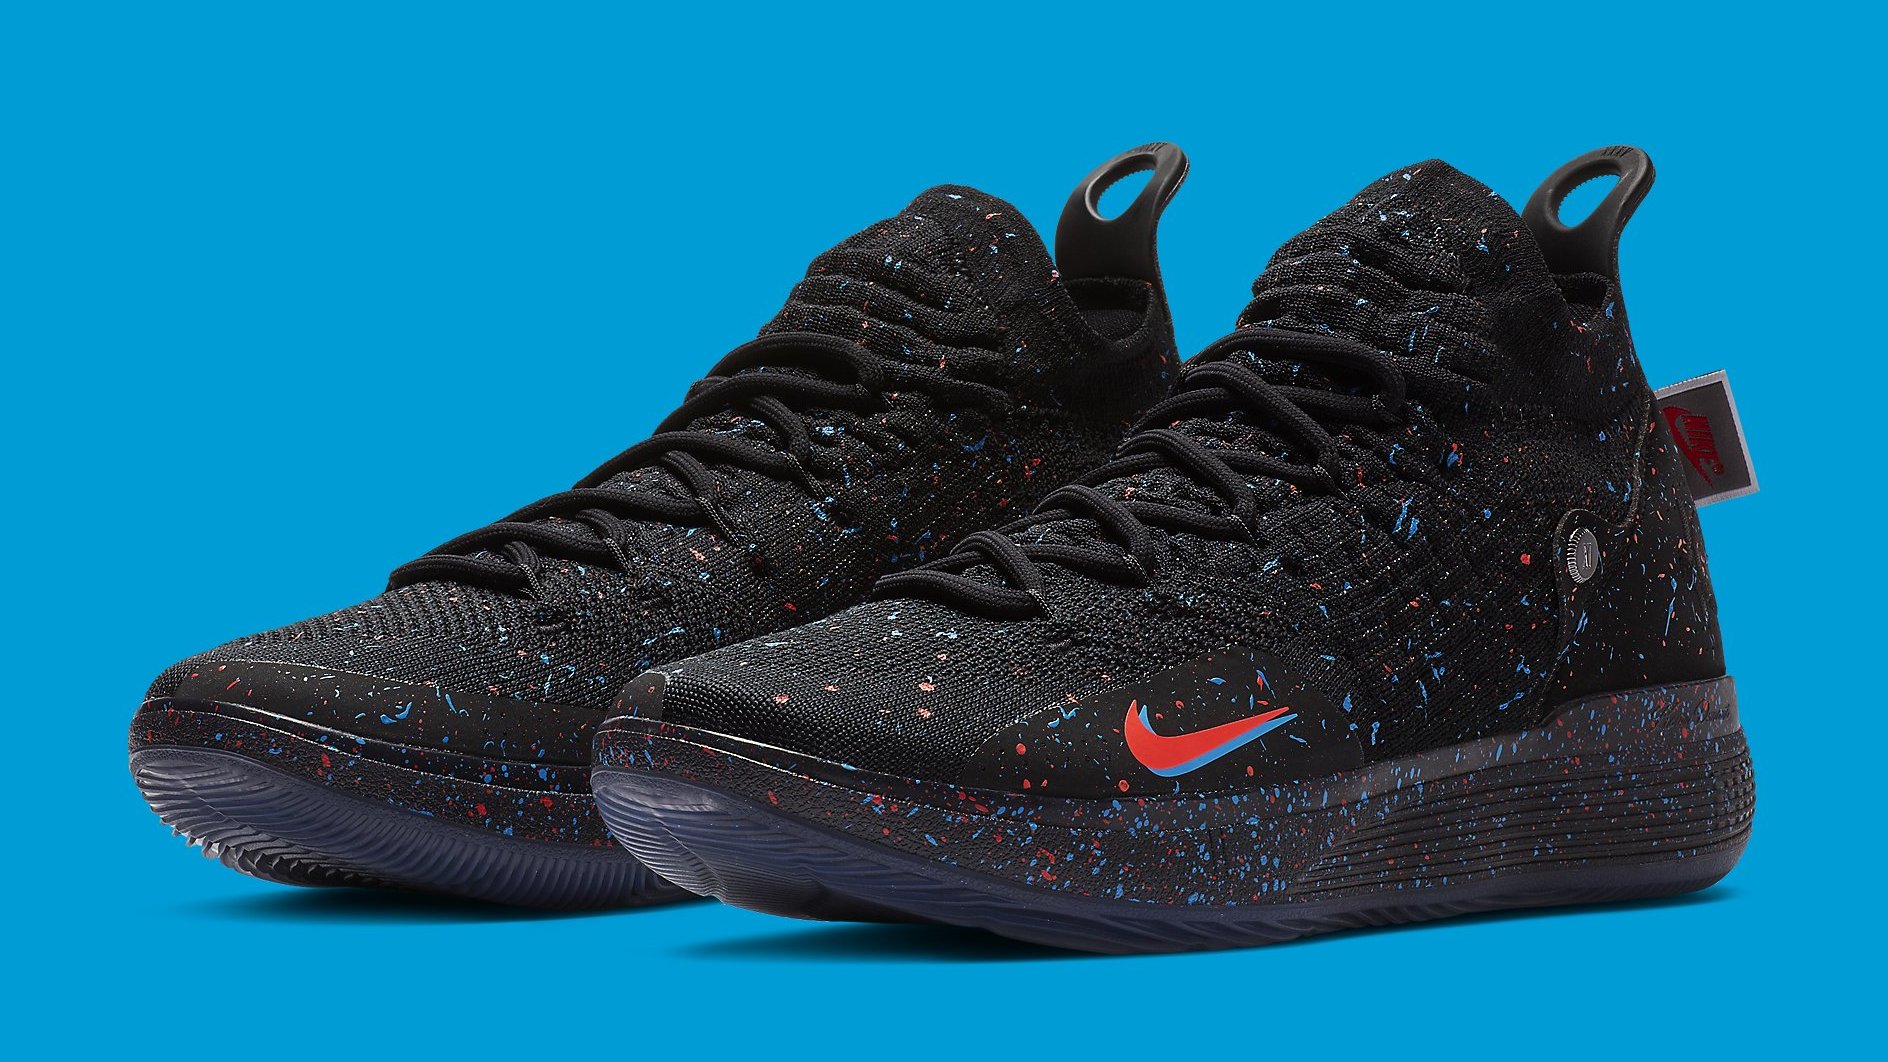 kd 11 black and blue